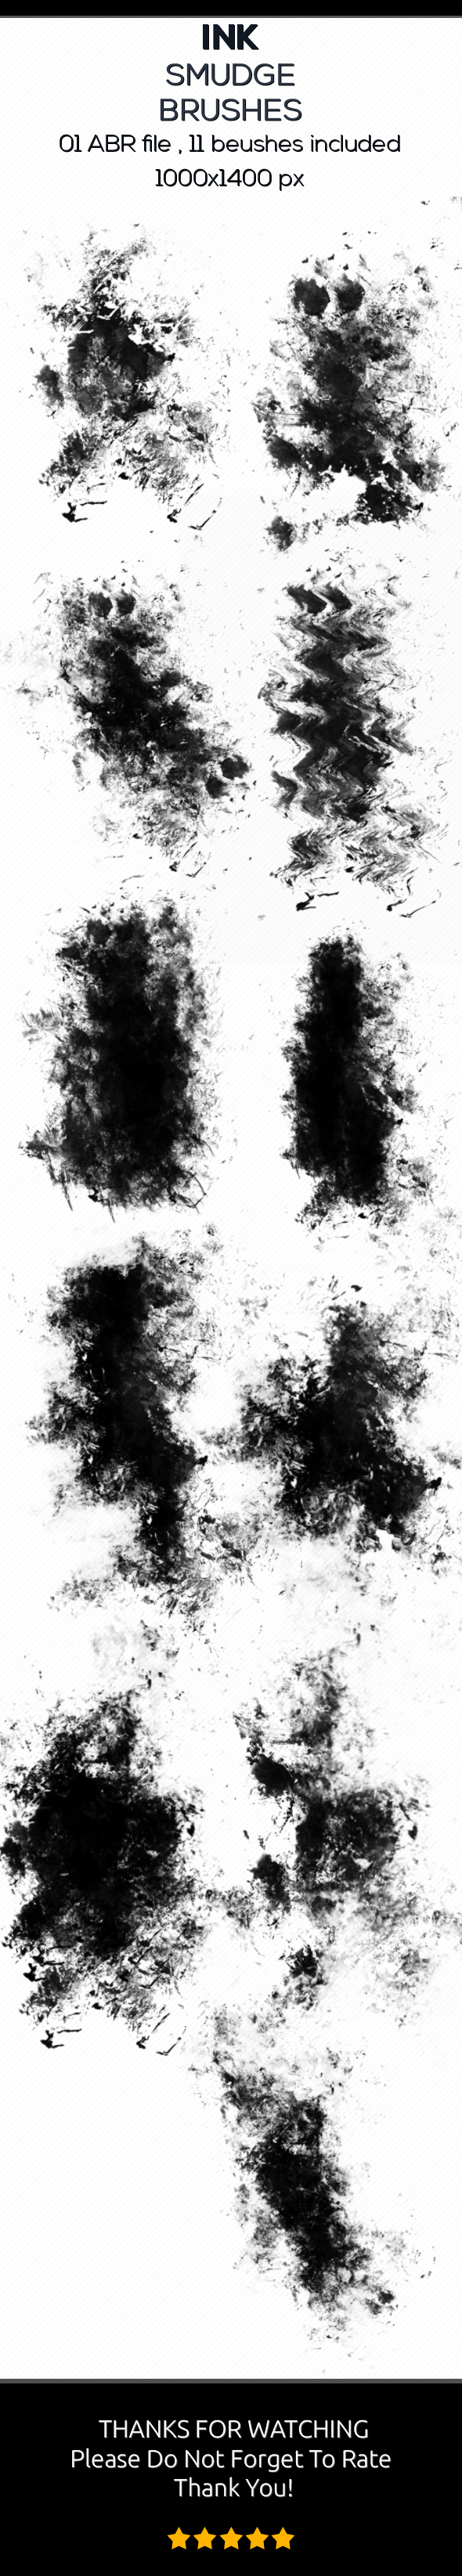 Ink Smudge Brushes